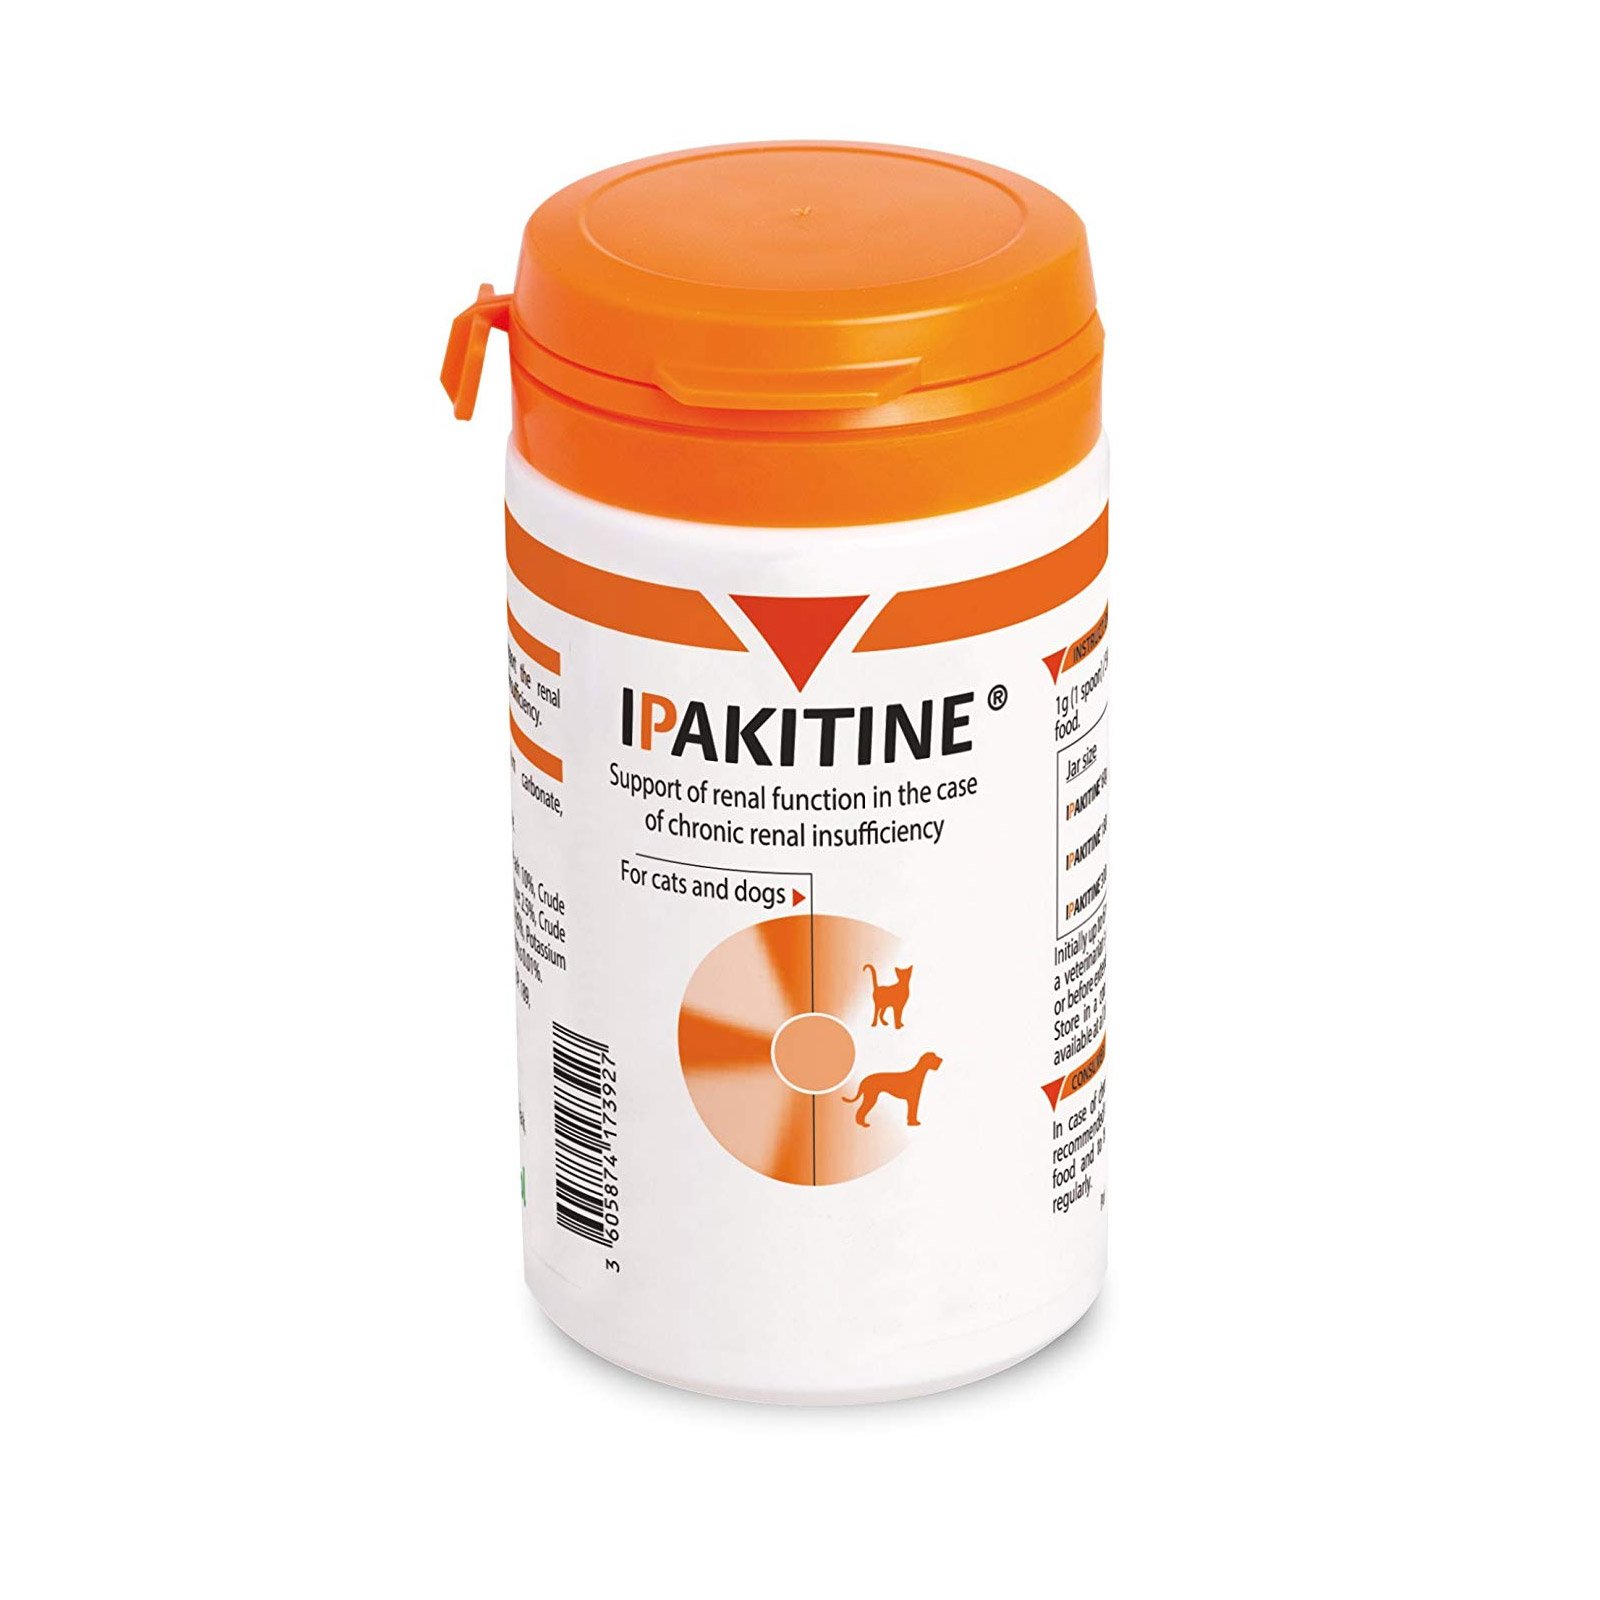 Ipakitine Calcium Supplement for Cats and Dogs